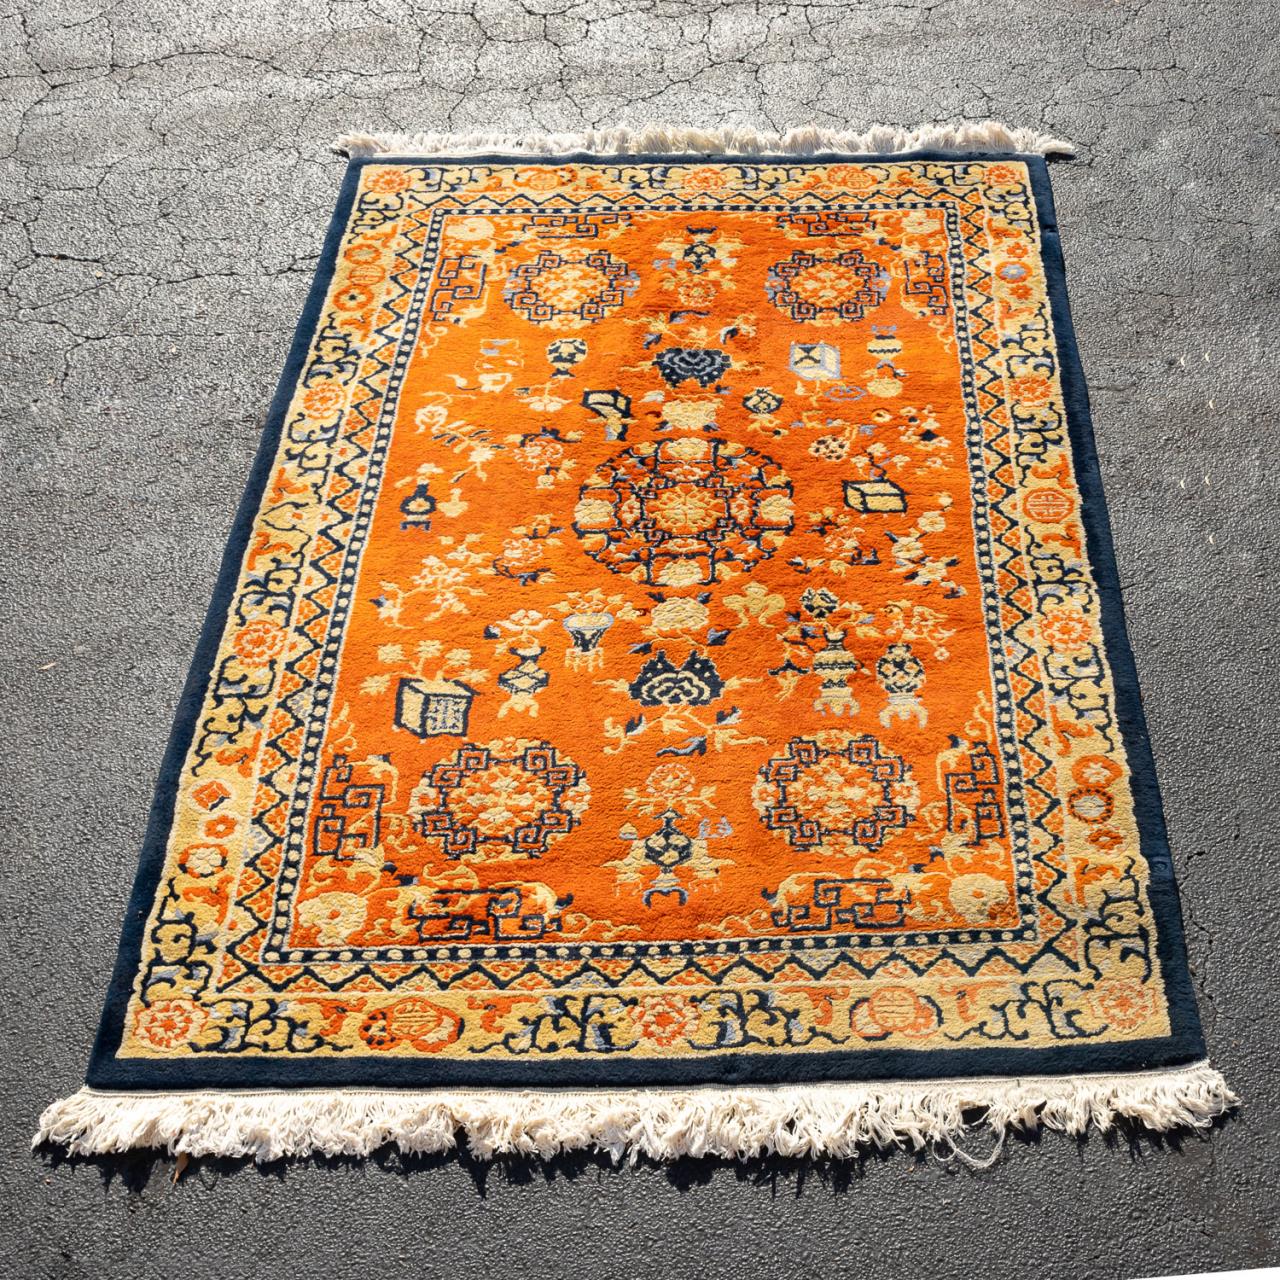 HAND WOVEN INDO CHINESE RUG 8  35a06d